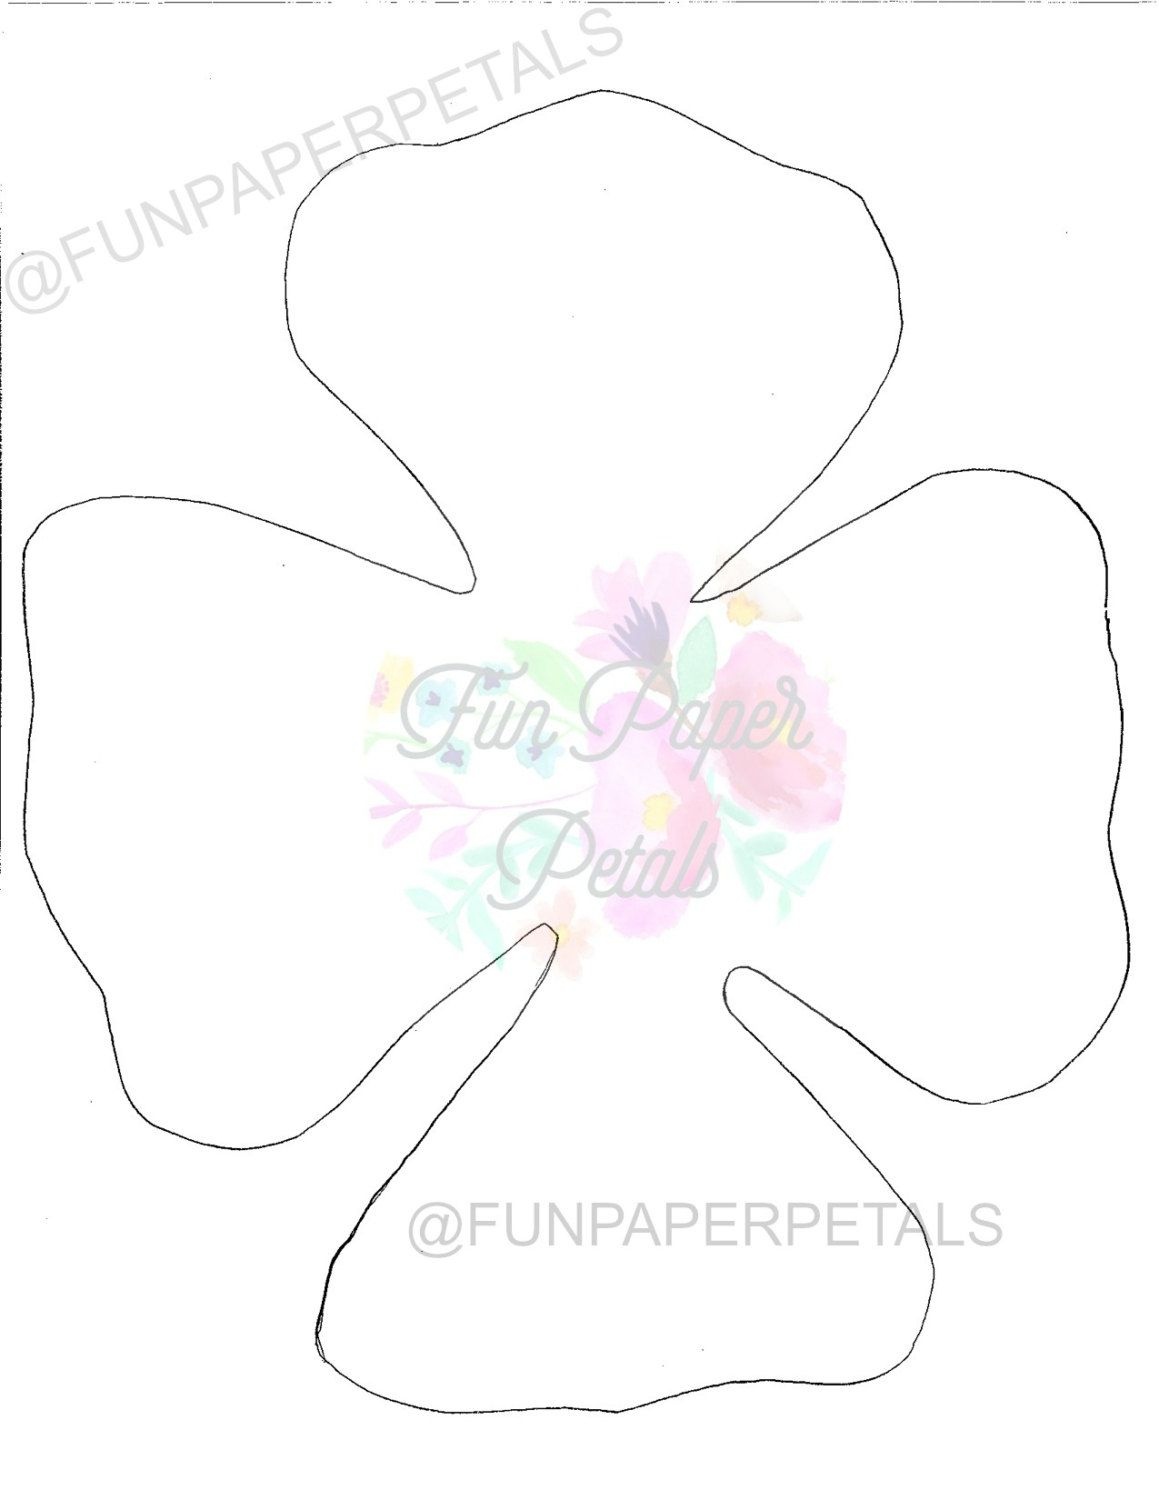 Image Result For Free Printable Paper Rose Templates | Paper Flowers - Free Paper Flower Templates Printable